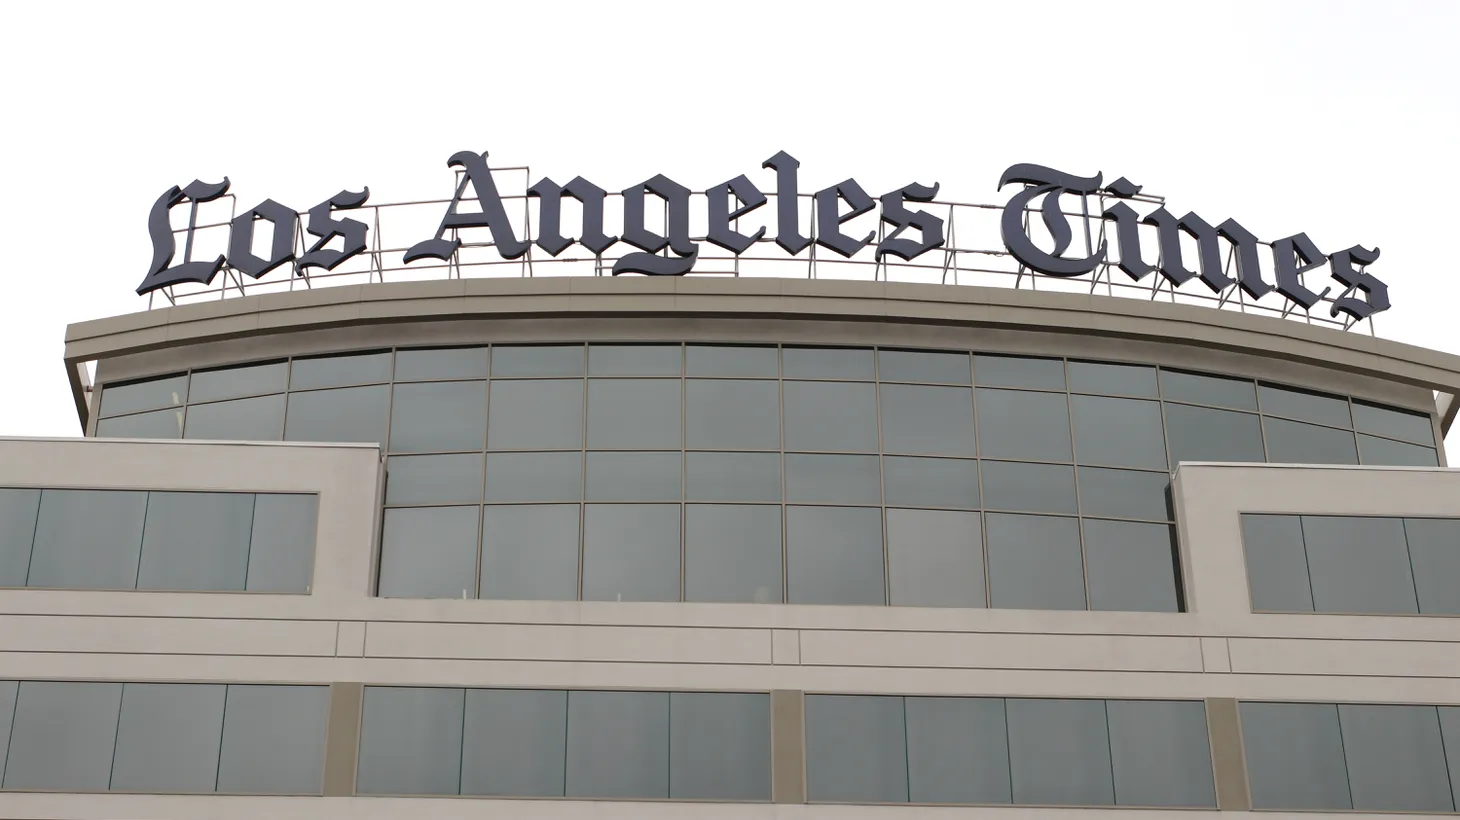 “As the Los Angeles Times has declined to really stake a claim to California, others have come in to pick up the slack. That includes CalMatters, which is a nonprofit newsroom based out of Sacramento, and now Politico, which is repeating their playbook from Washington in California. That leaves less space for the Los Angeles Times to reclaim that, which is a lost opportunity,” says USC Journalism Professor Gabriel Kahn.